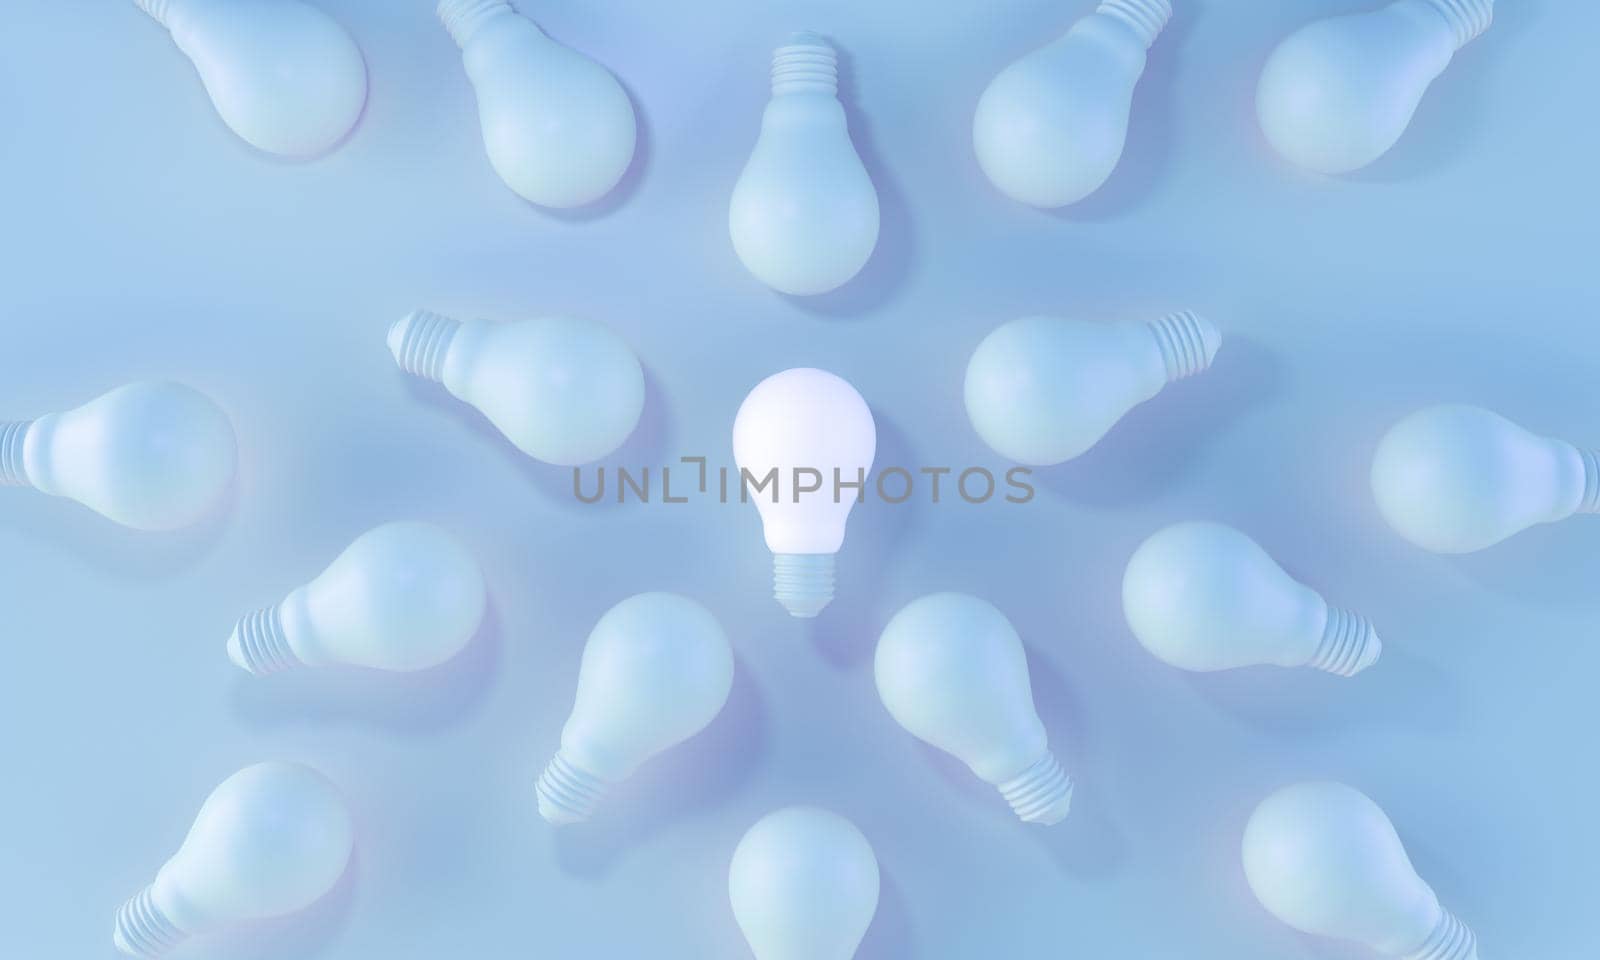 Glowing Light Bulb white Standing Out From the Crowd on blue background. ideas, leadership, creativity concept. 3d rendering. by ImagesRouges